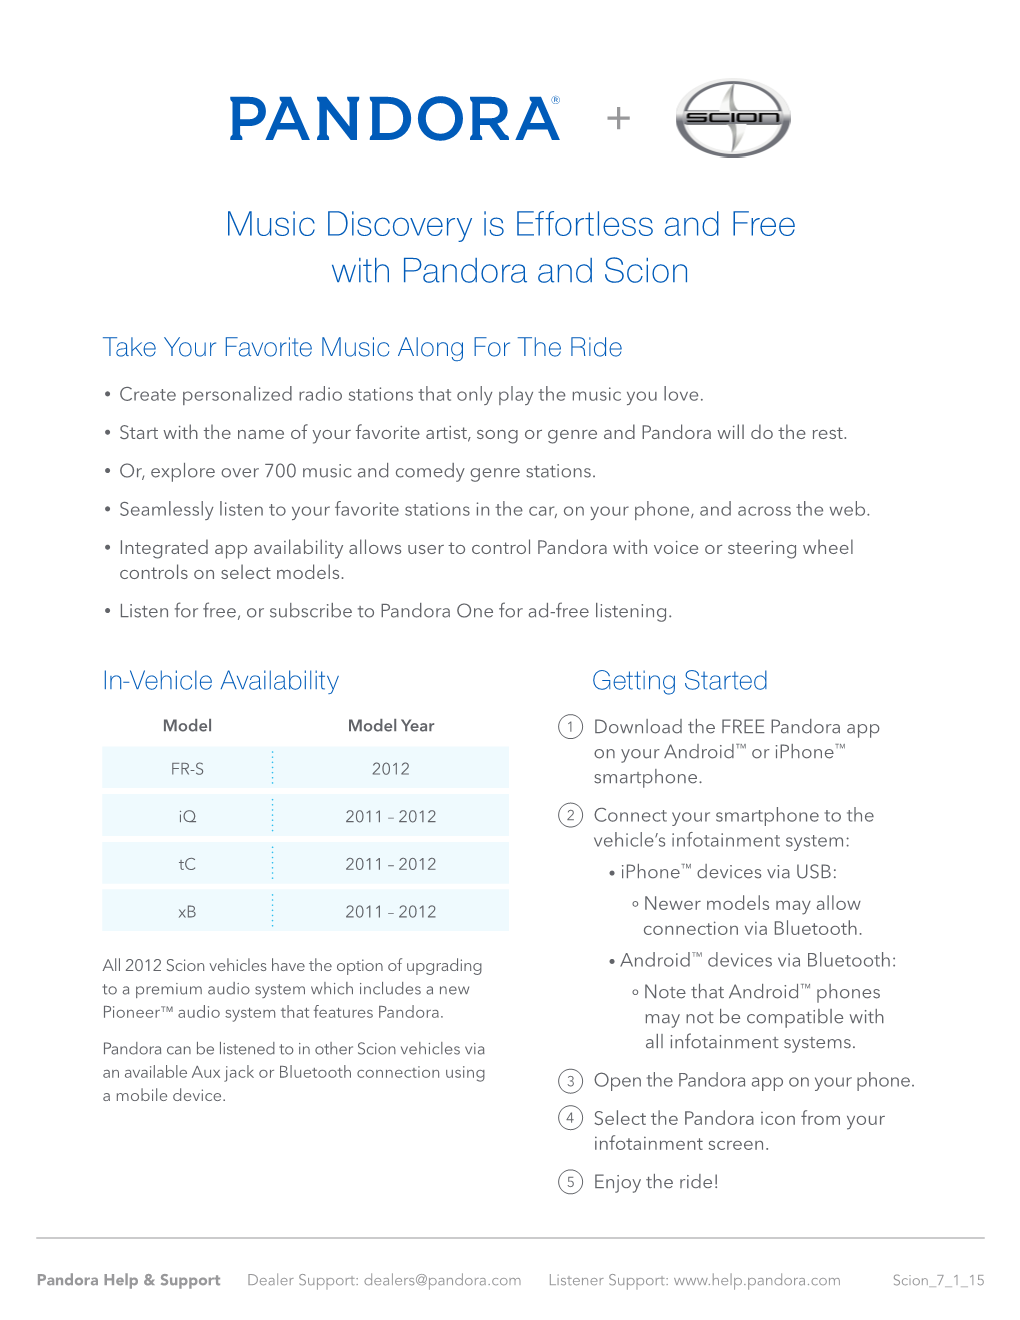 Music Discovery Is Effortless and Free with Pandora and Scion